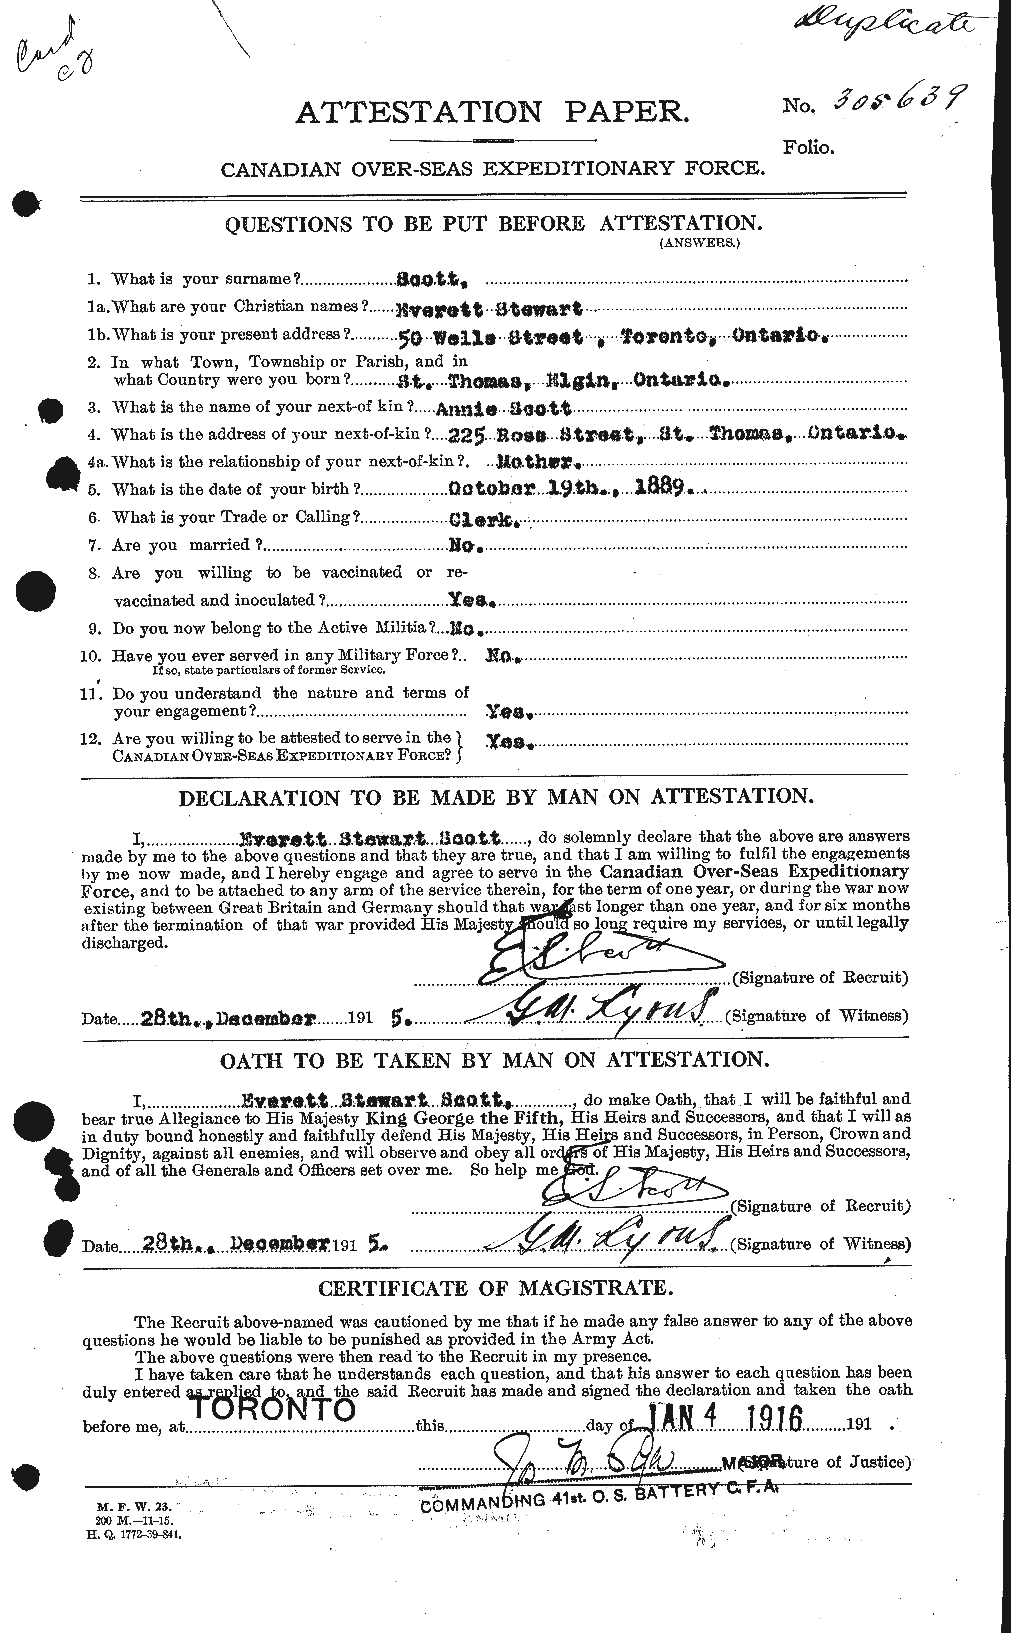 Personnel Records of the First World War - CEF 084999a